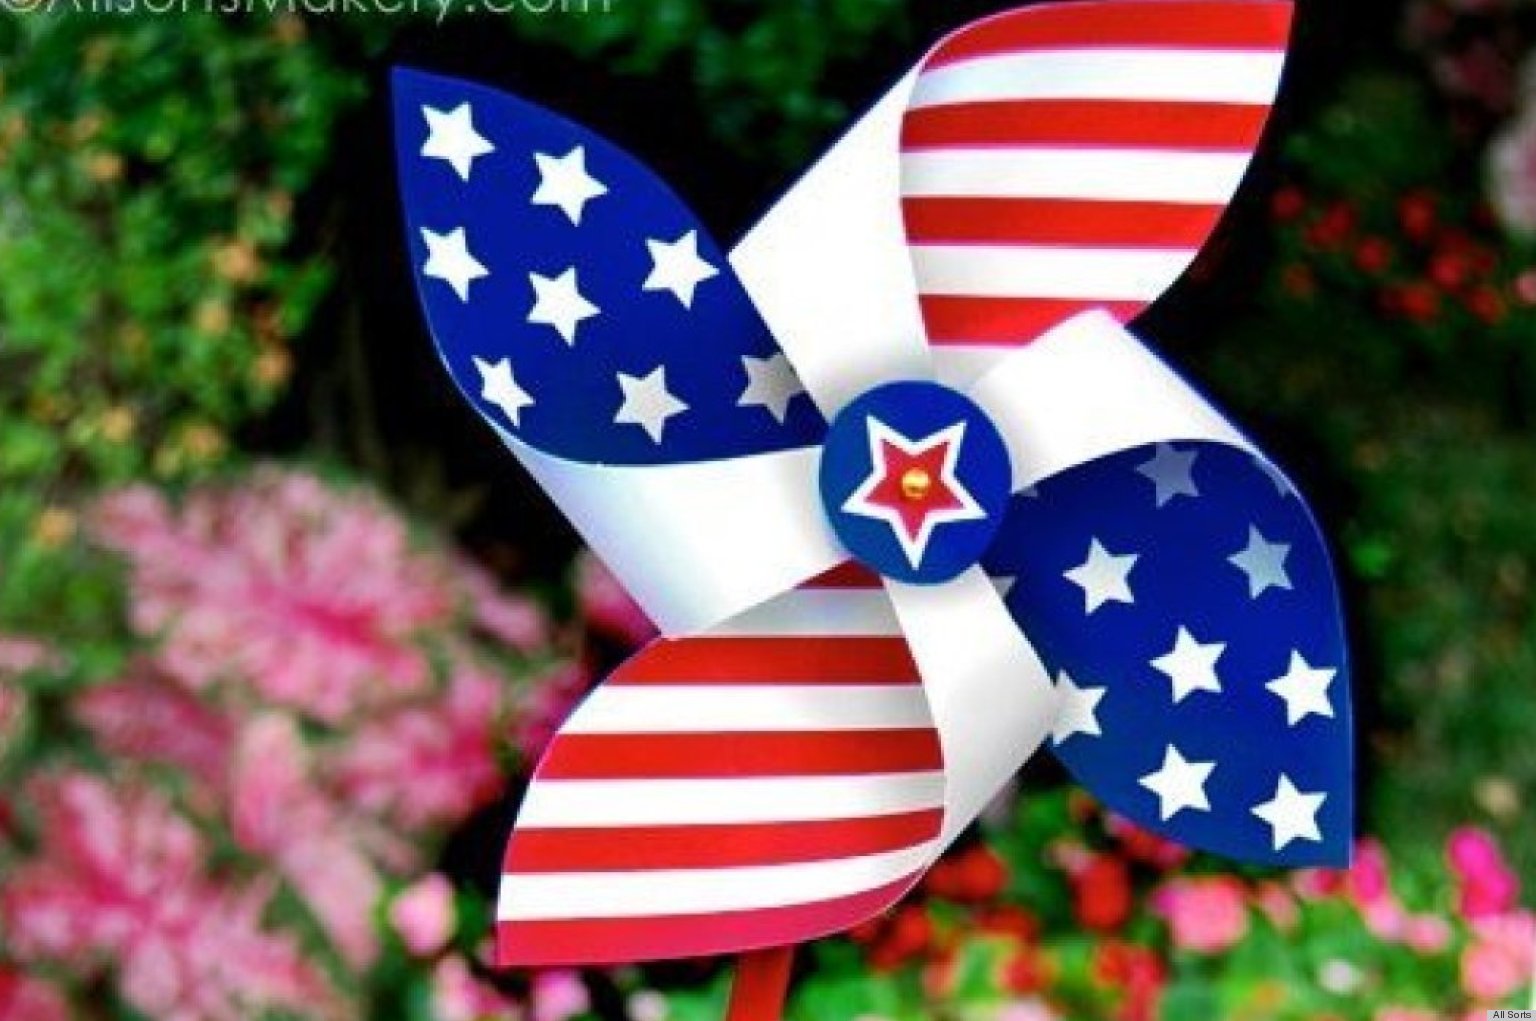 14 Memorial Day Printables To Celebrate In Style (PHOTOS) HuffPost